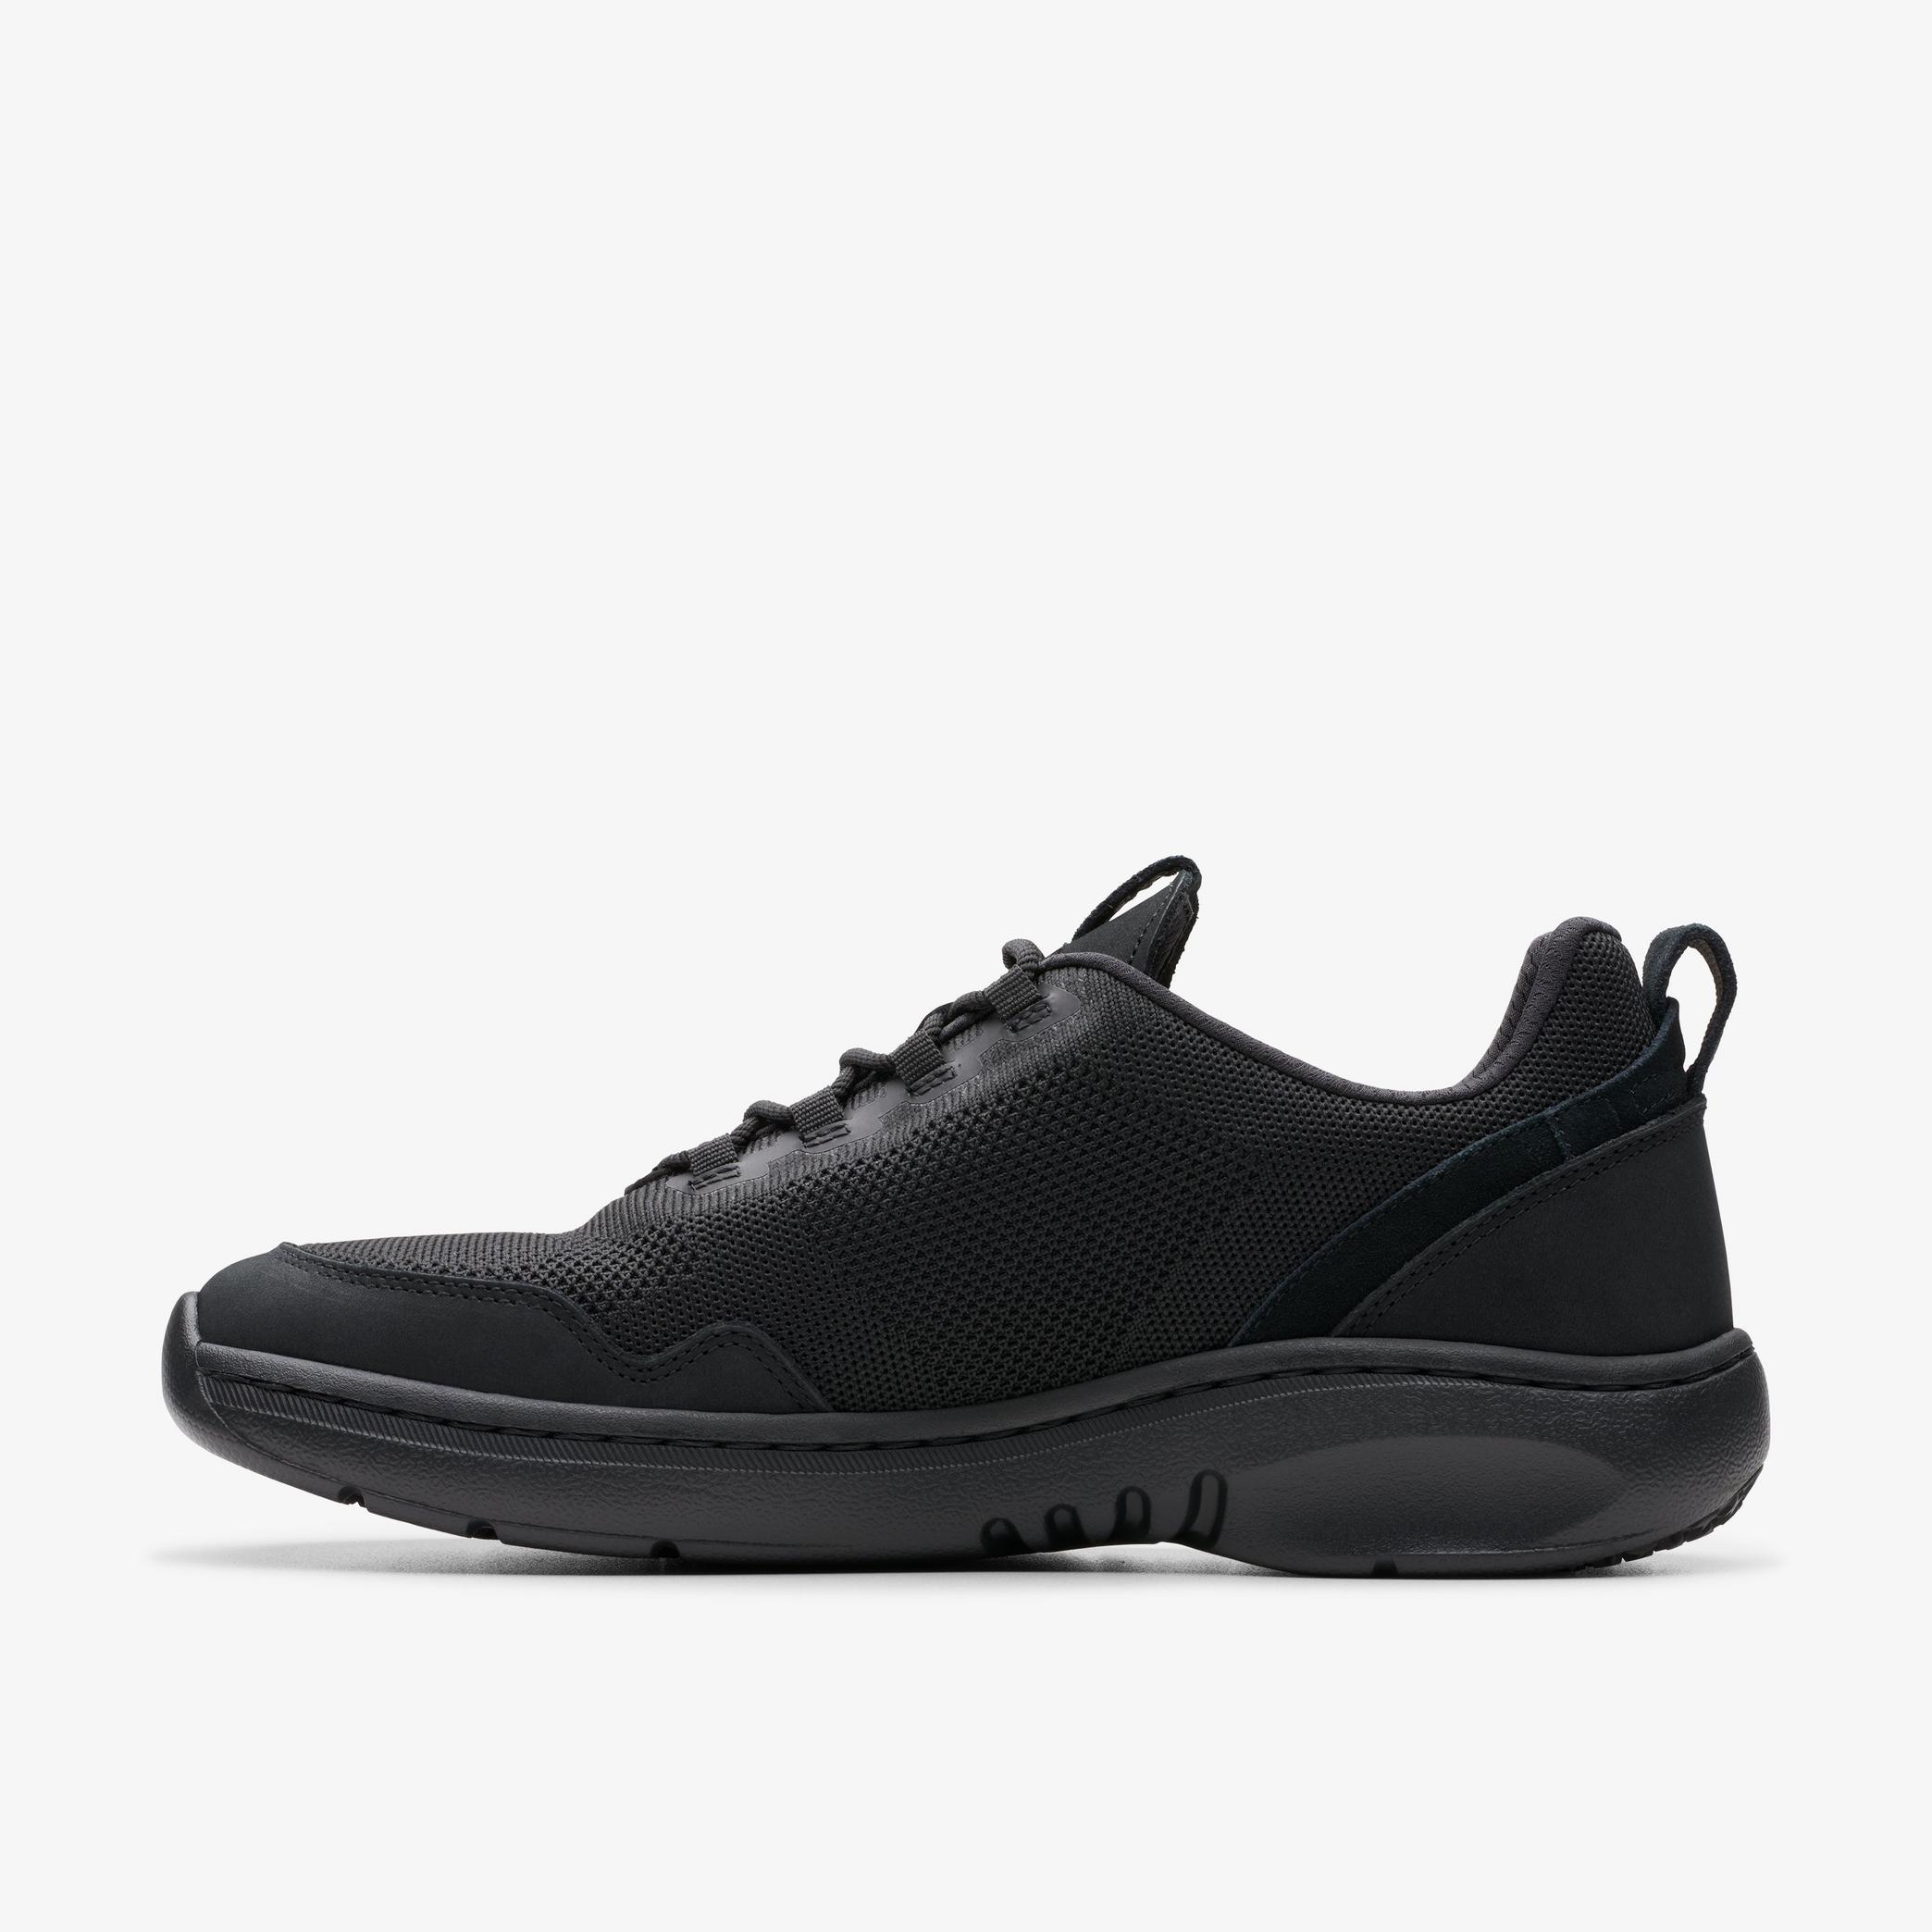 Clarks Pro Knit Black Shoes, view 2 of 6